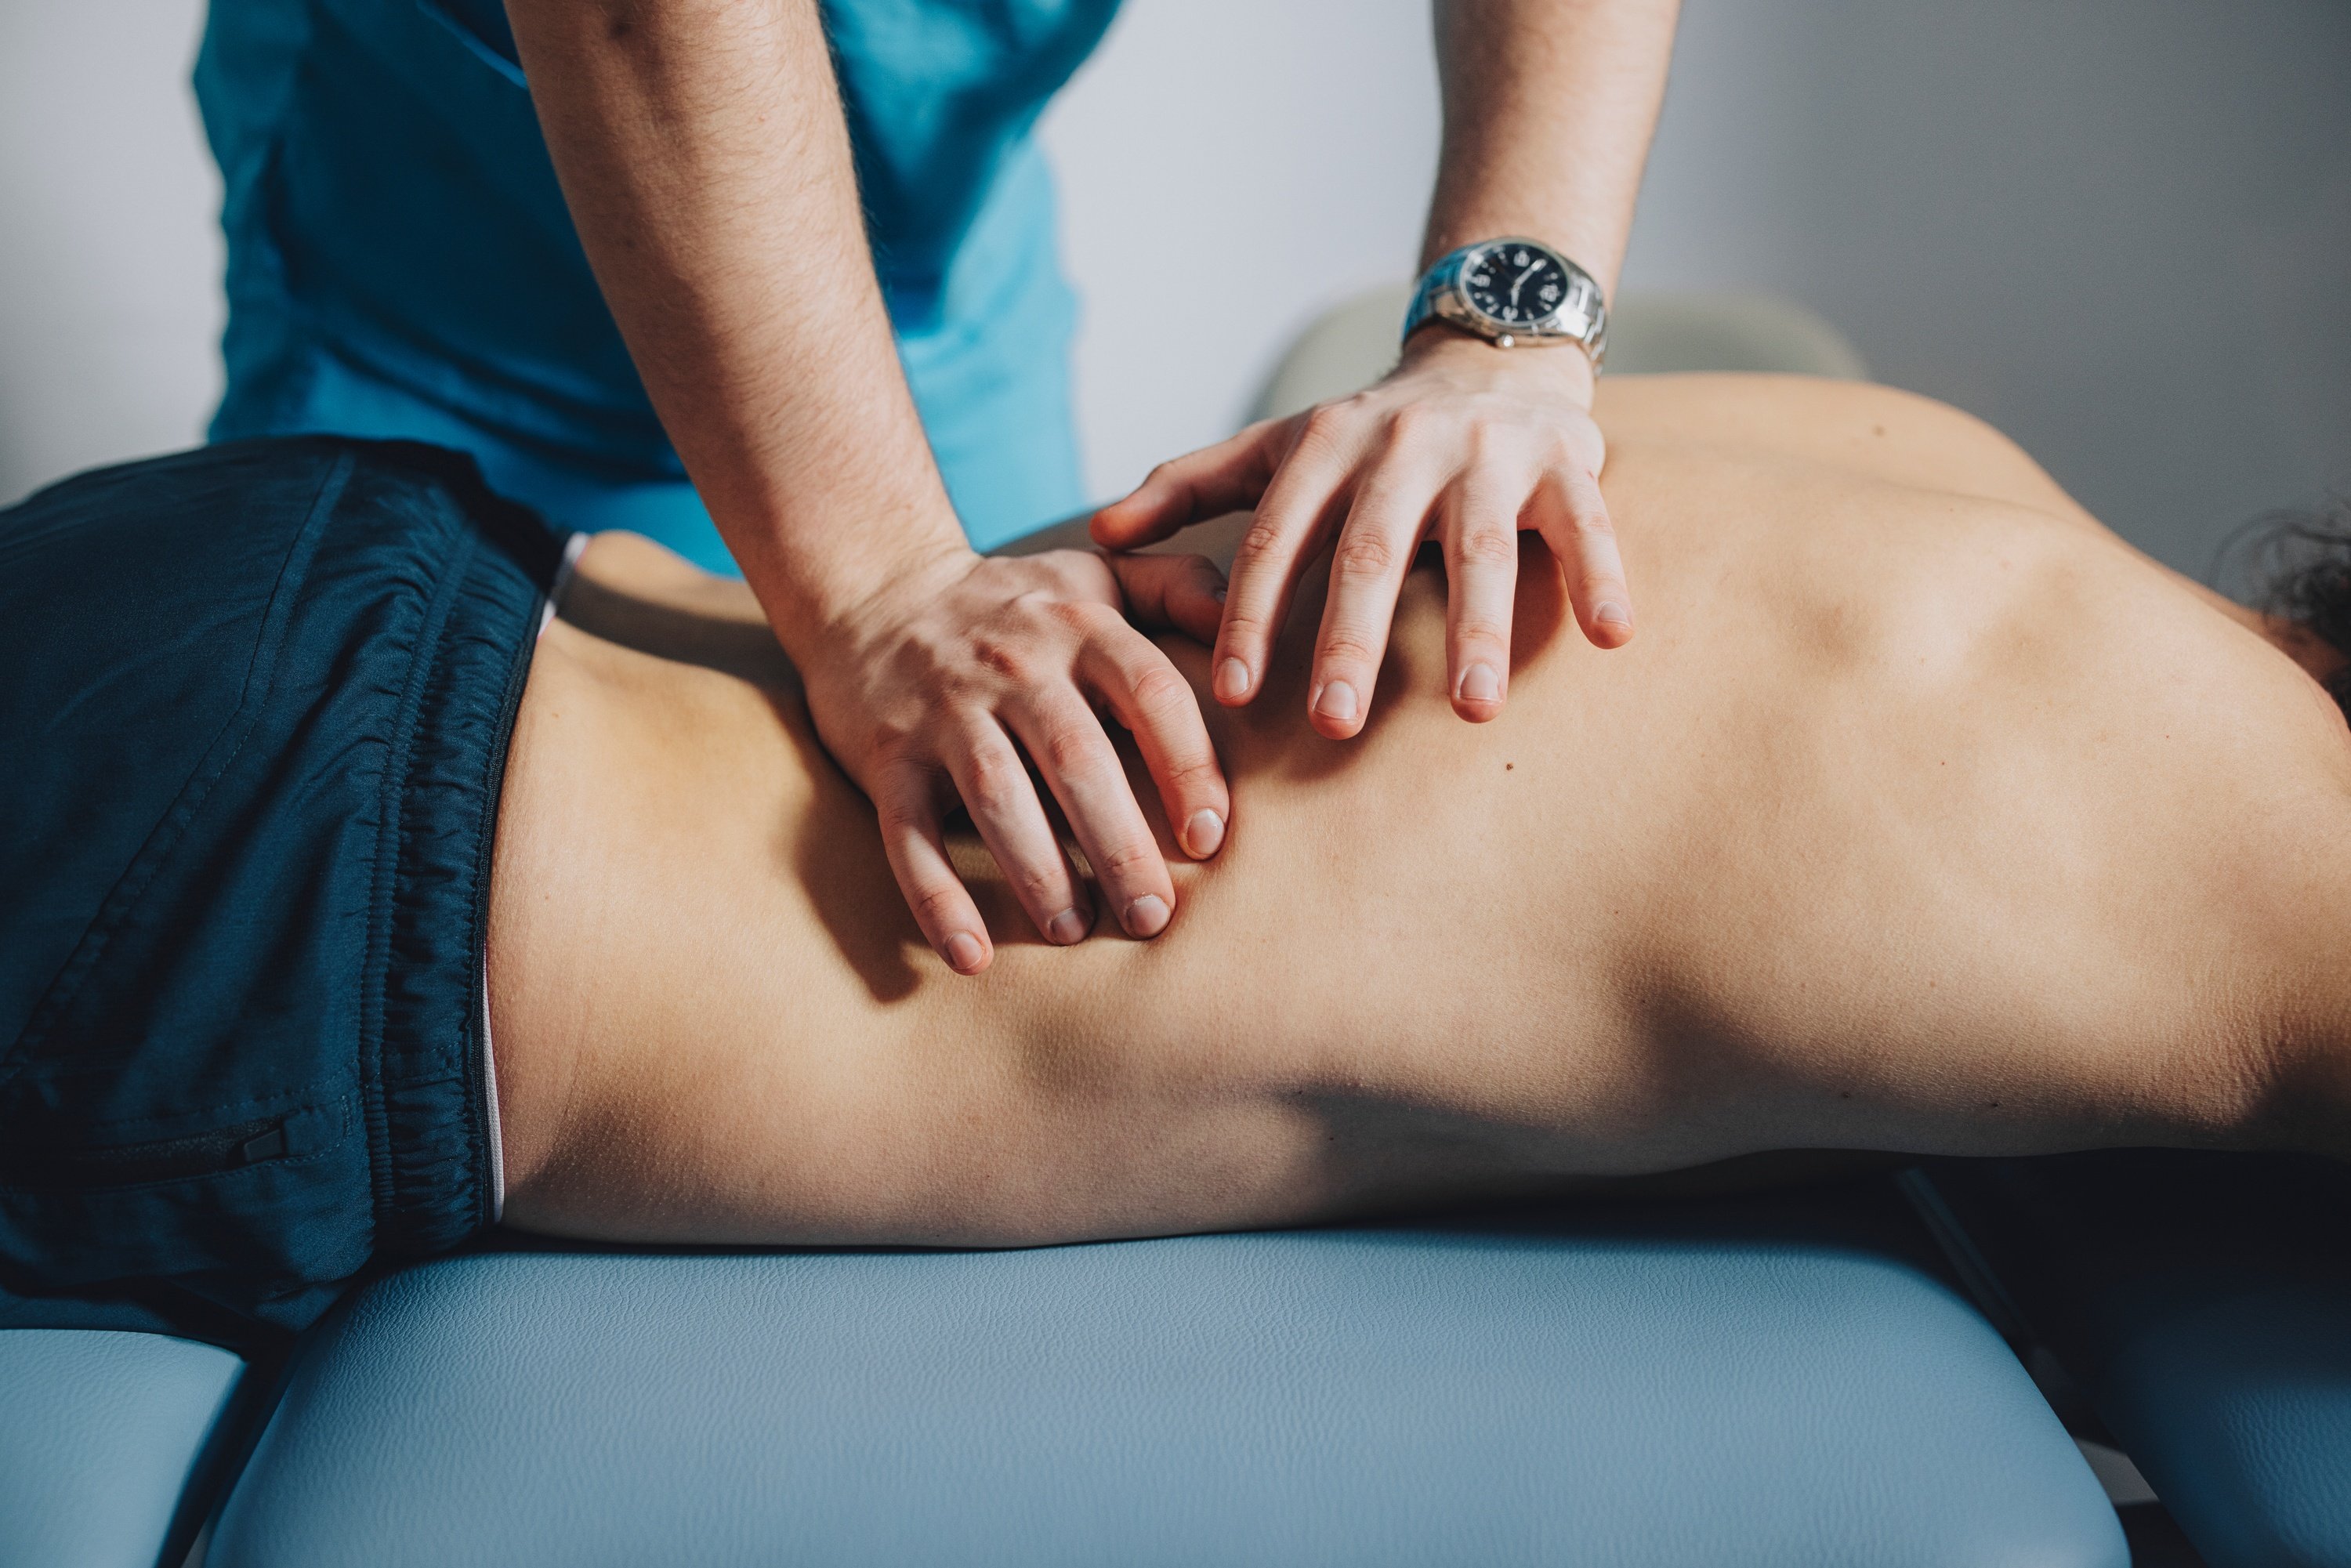 When Should I See a Chiropractor?